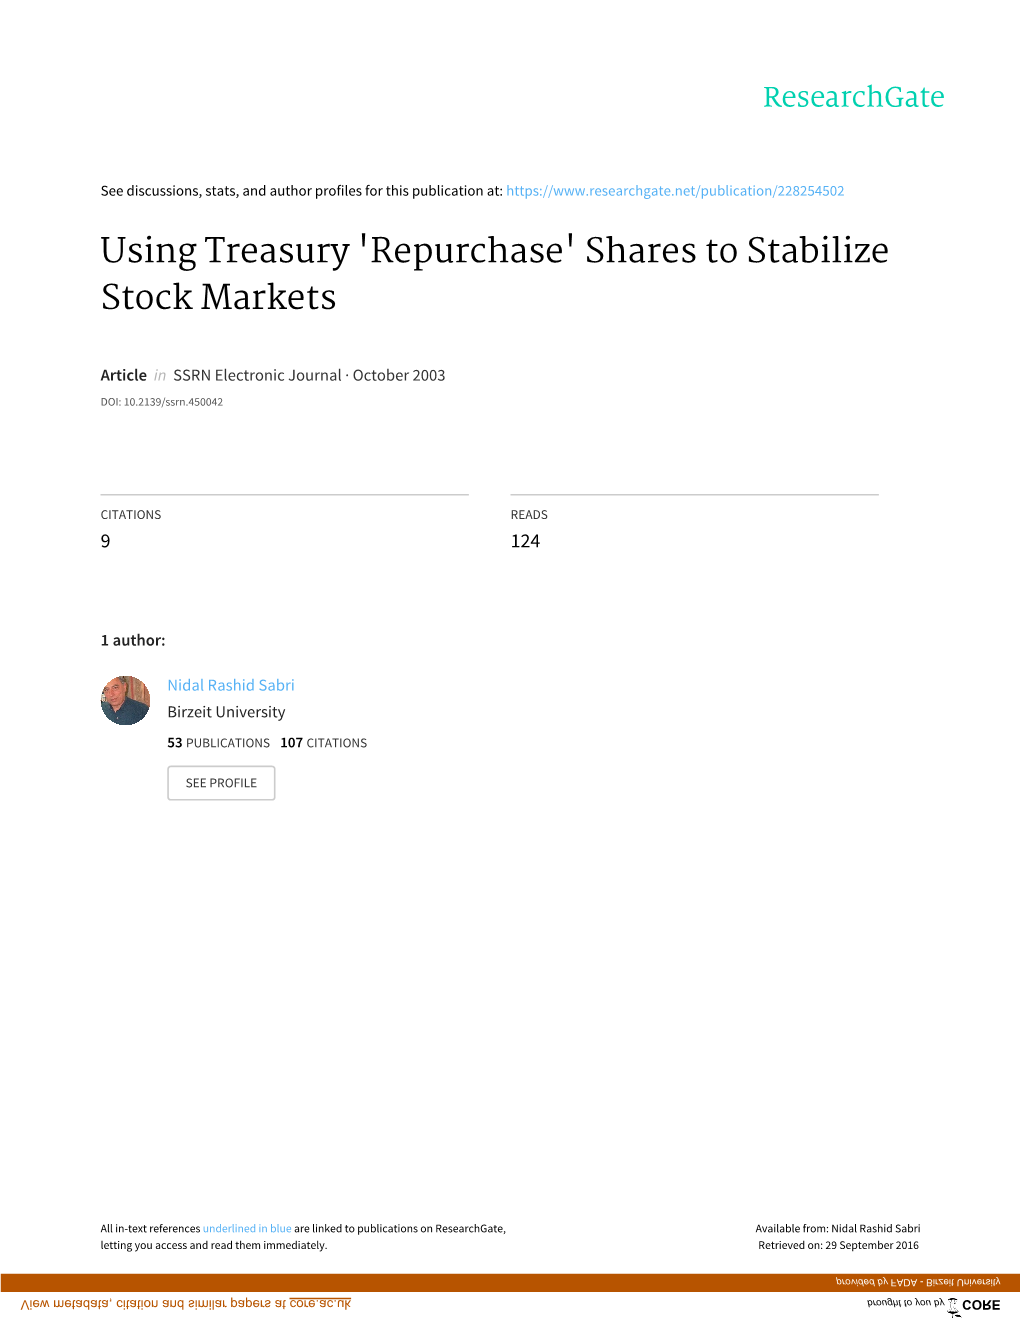 Using Treasury 'Repurchase' Shares to Stabilize Stock Markets